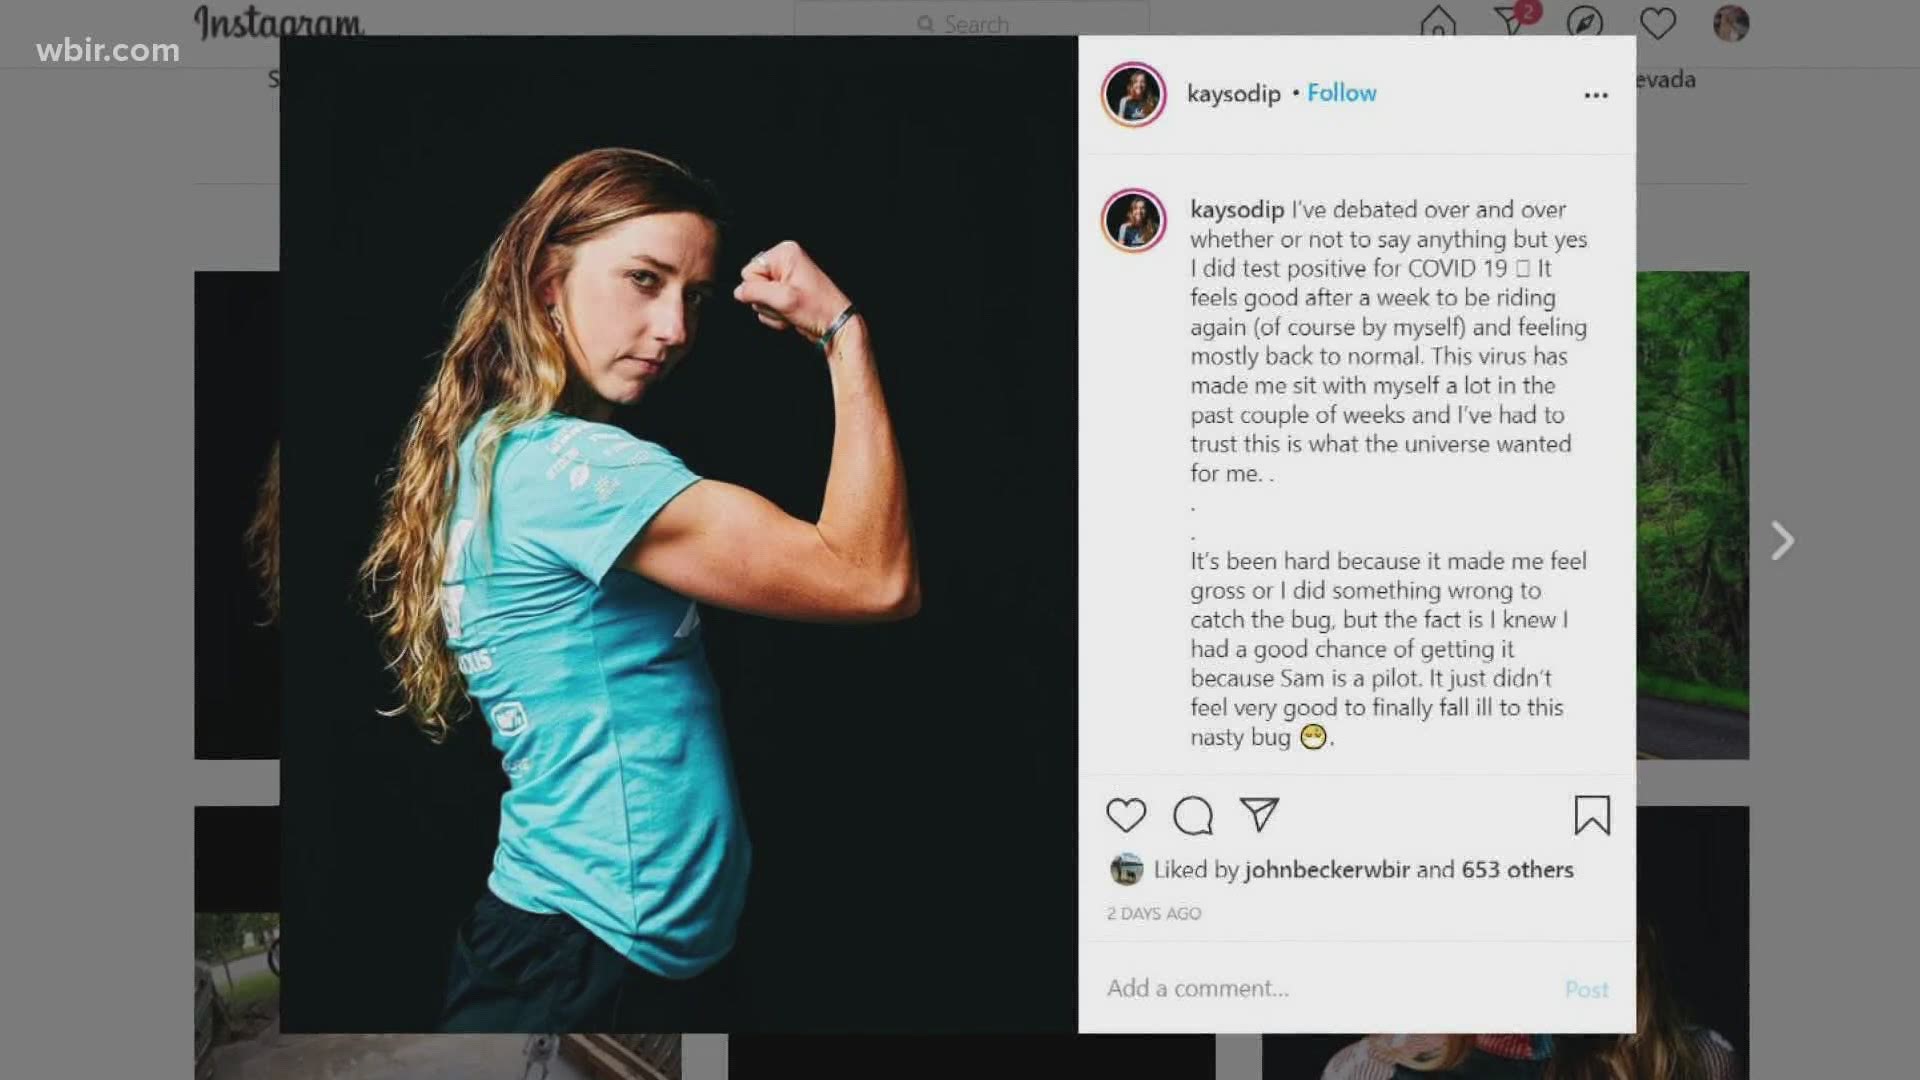 A Knoxville-based professional athlete is going public about her experience with COVID-19.